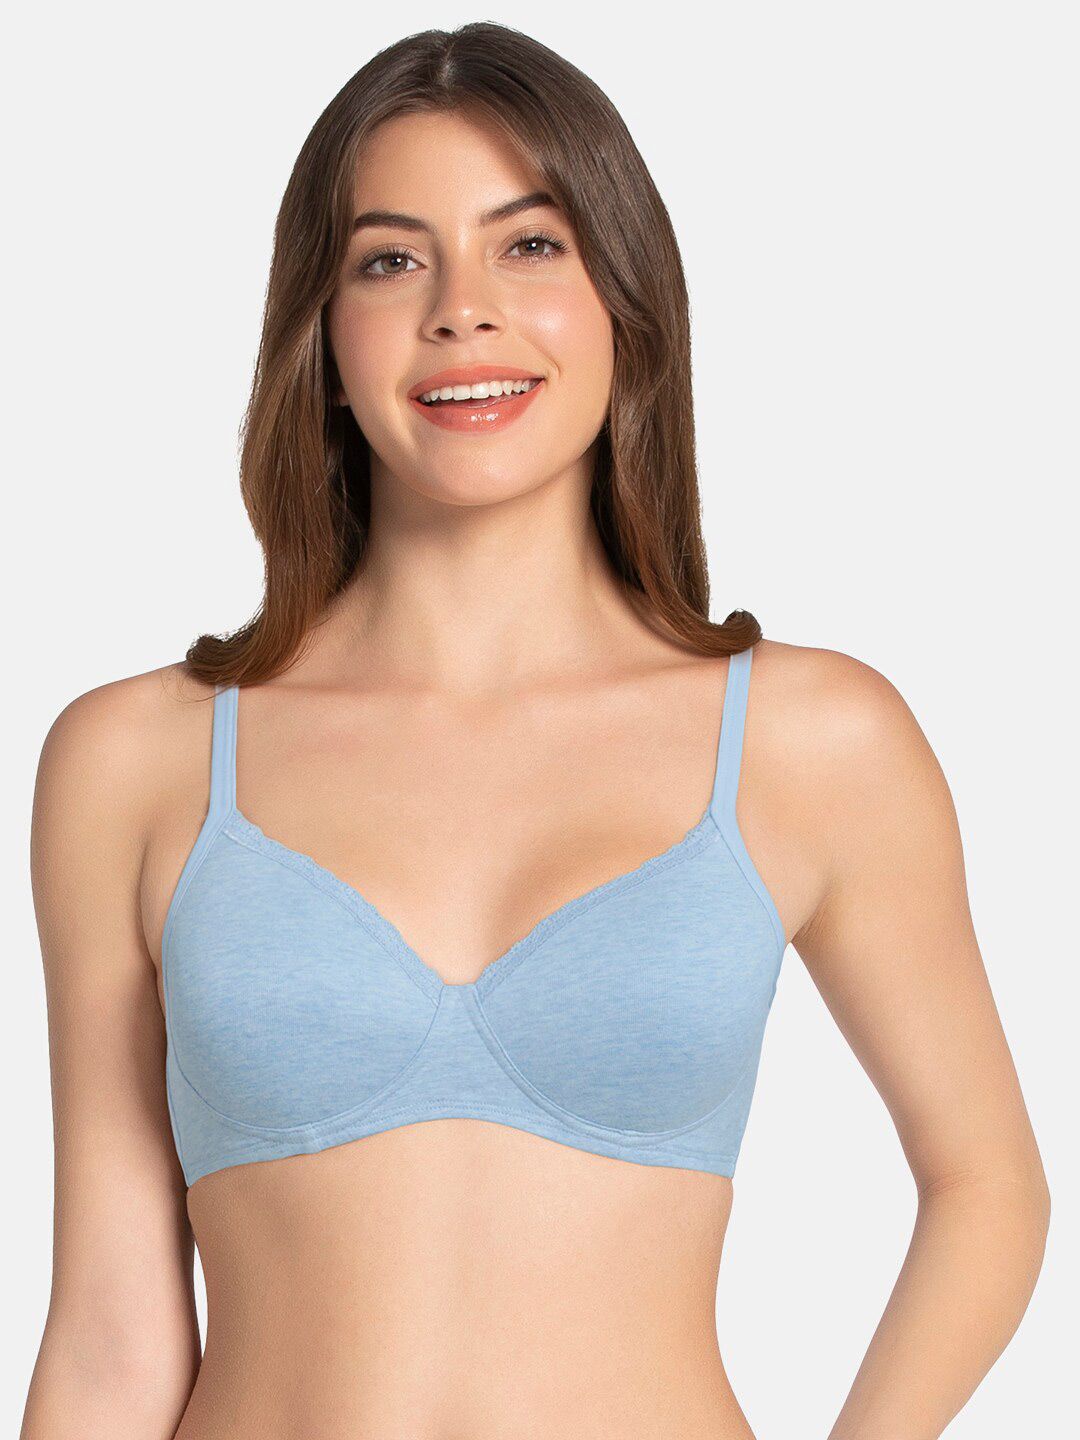 Amante Solid Padded Cotton Casual T-Shirt Bra - BRA10202 - Price